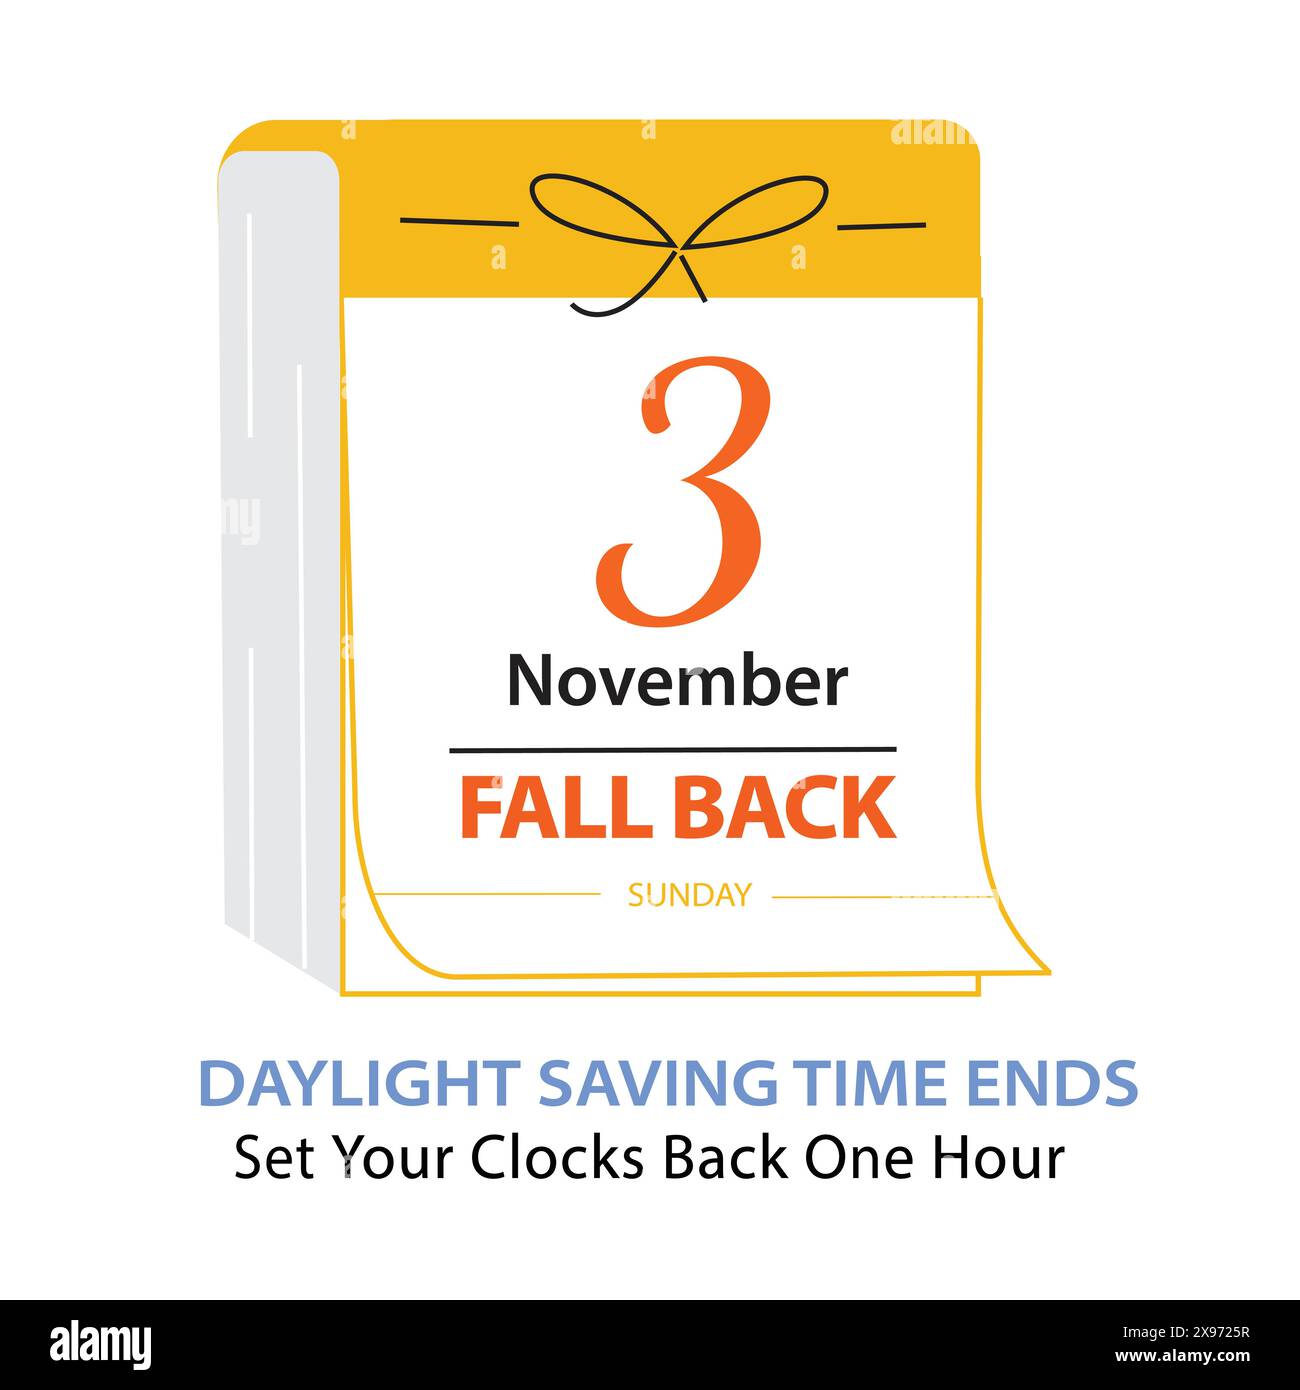 Fall Back Time Calendar Date 3 November, 2024. Daylight Saving Time Ends Web Banner with Reminder Text Change Clocks Back One Hour. Vector illustratio Stock Vector